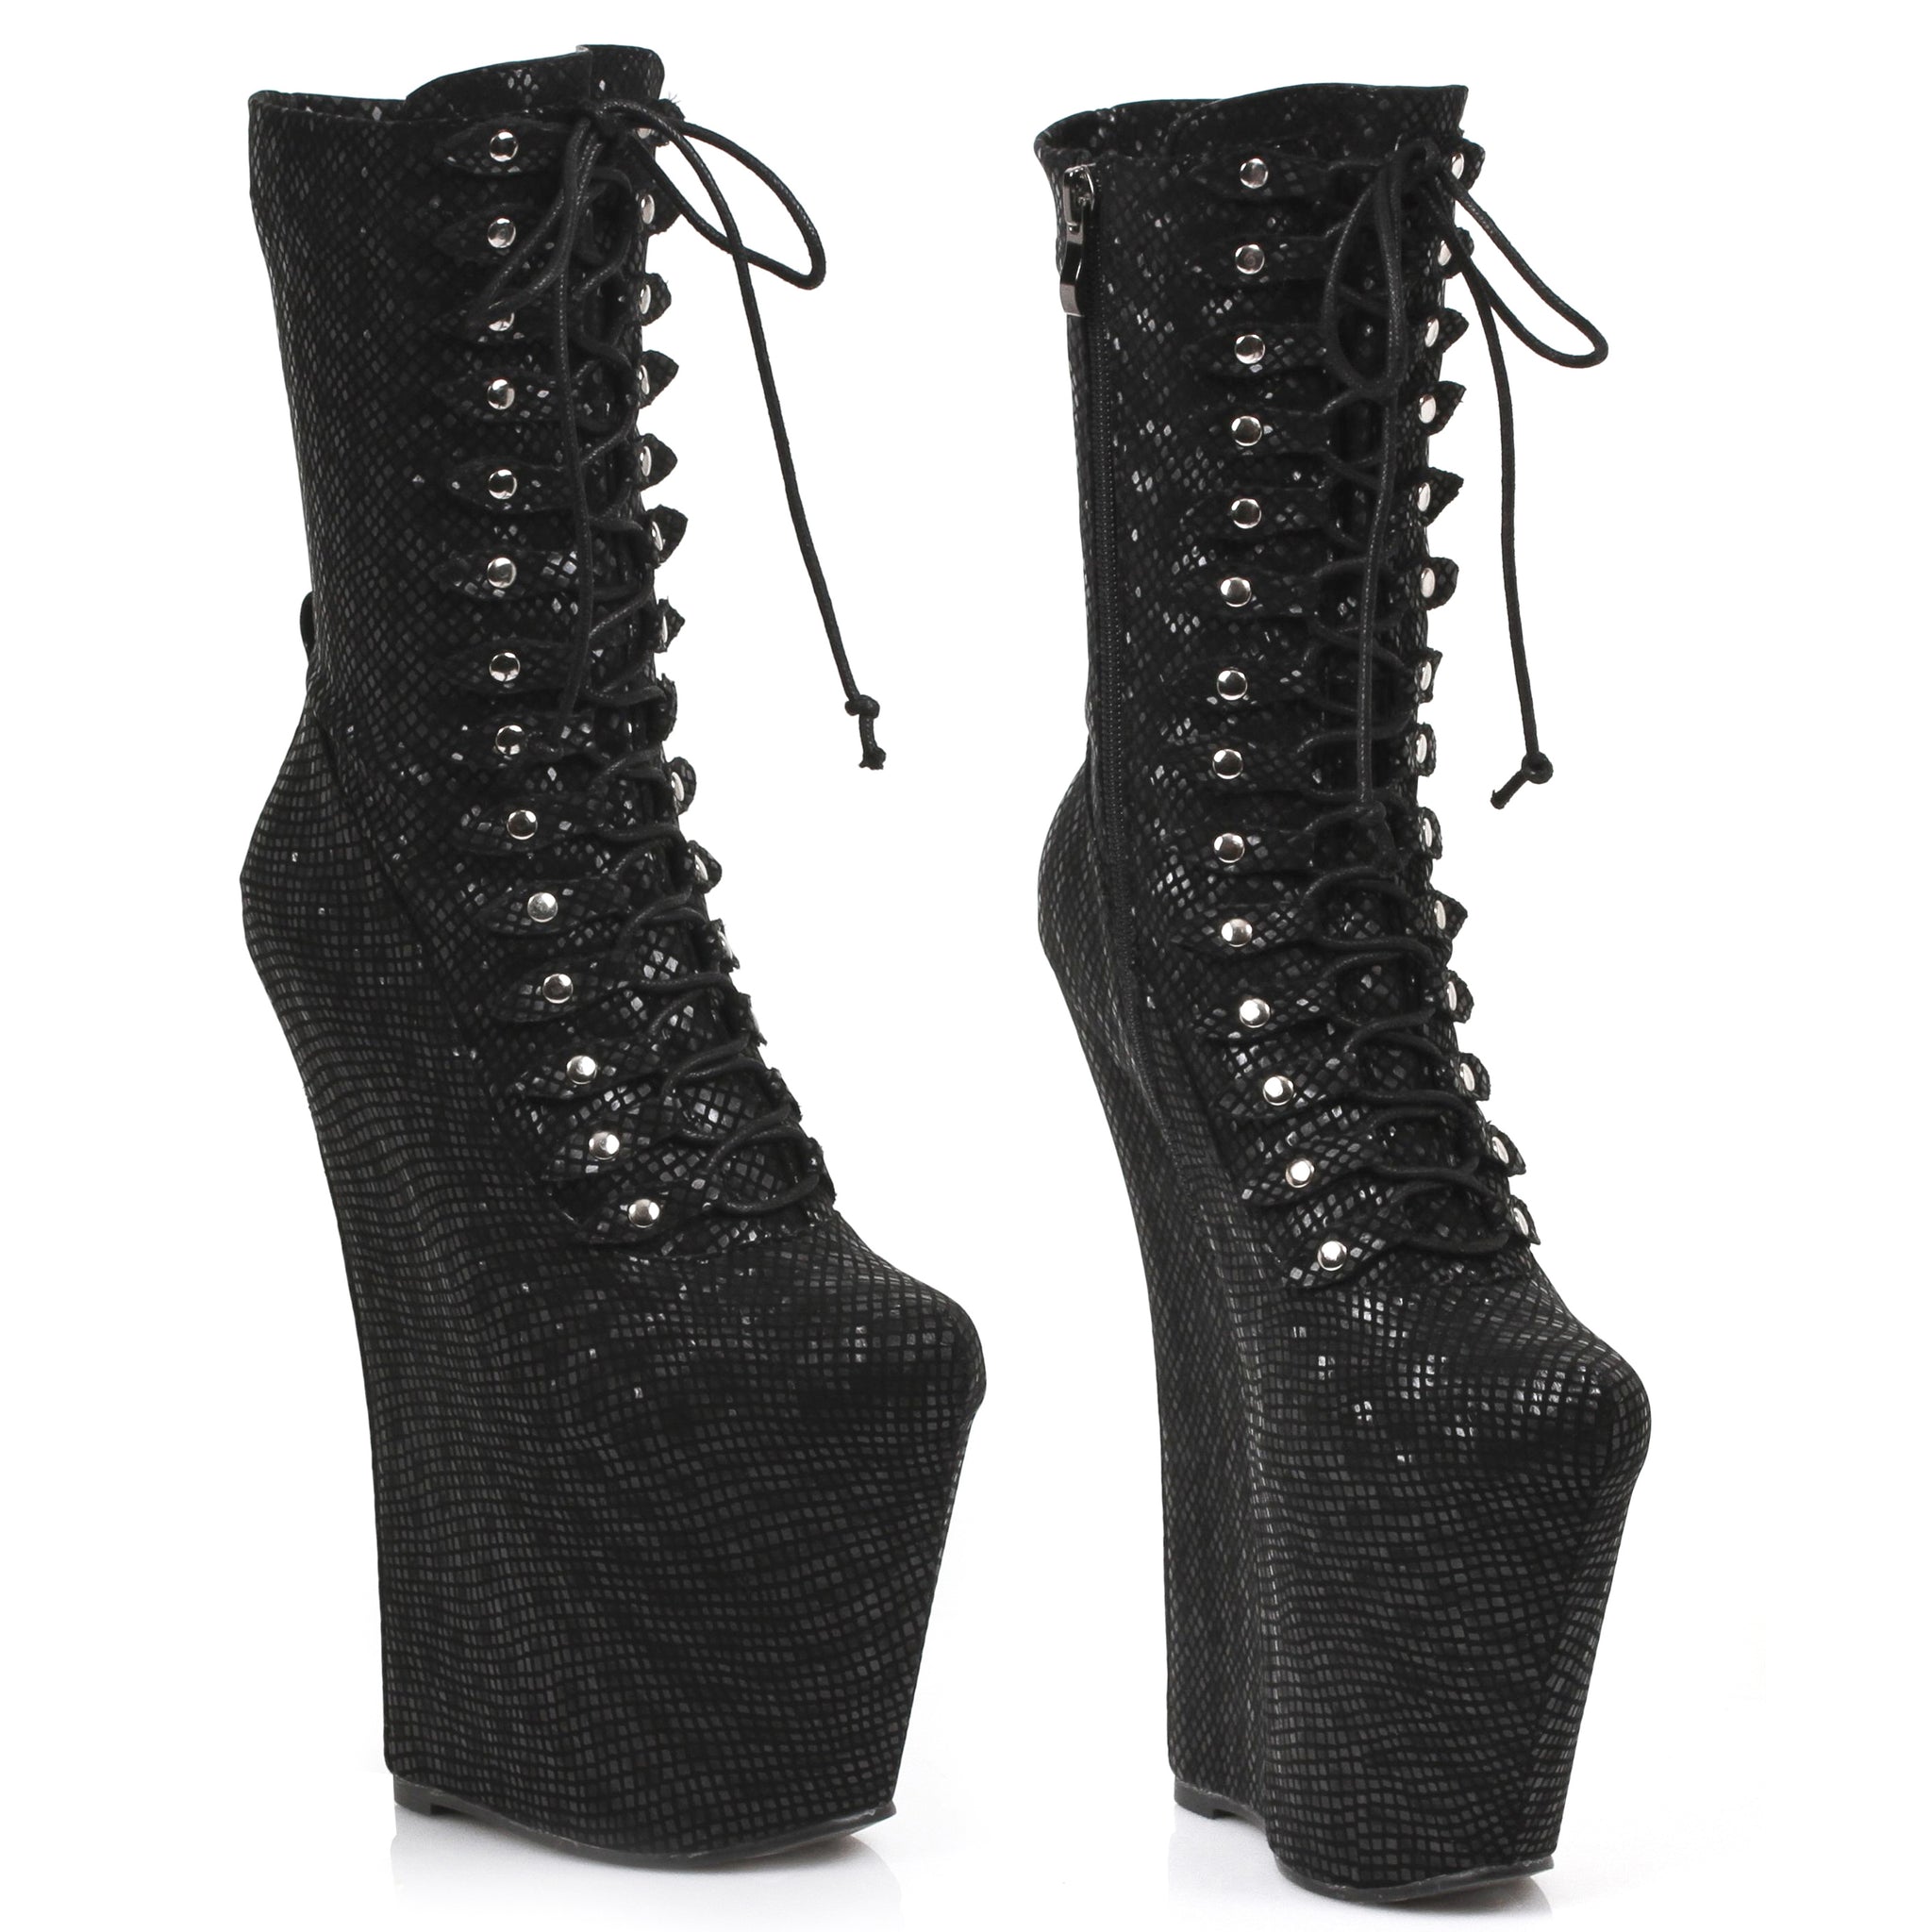 8 inch lace up under knee boot